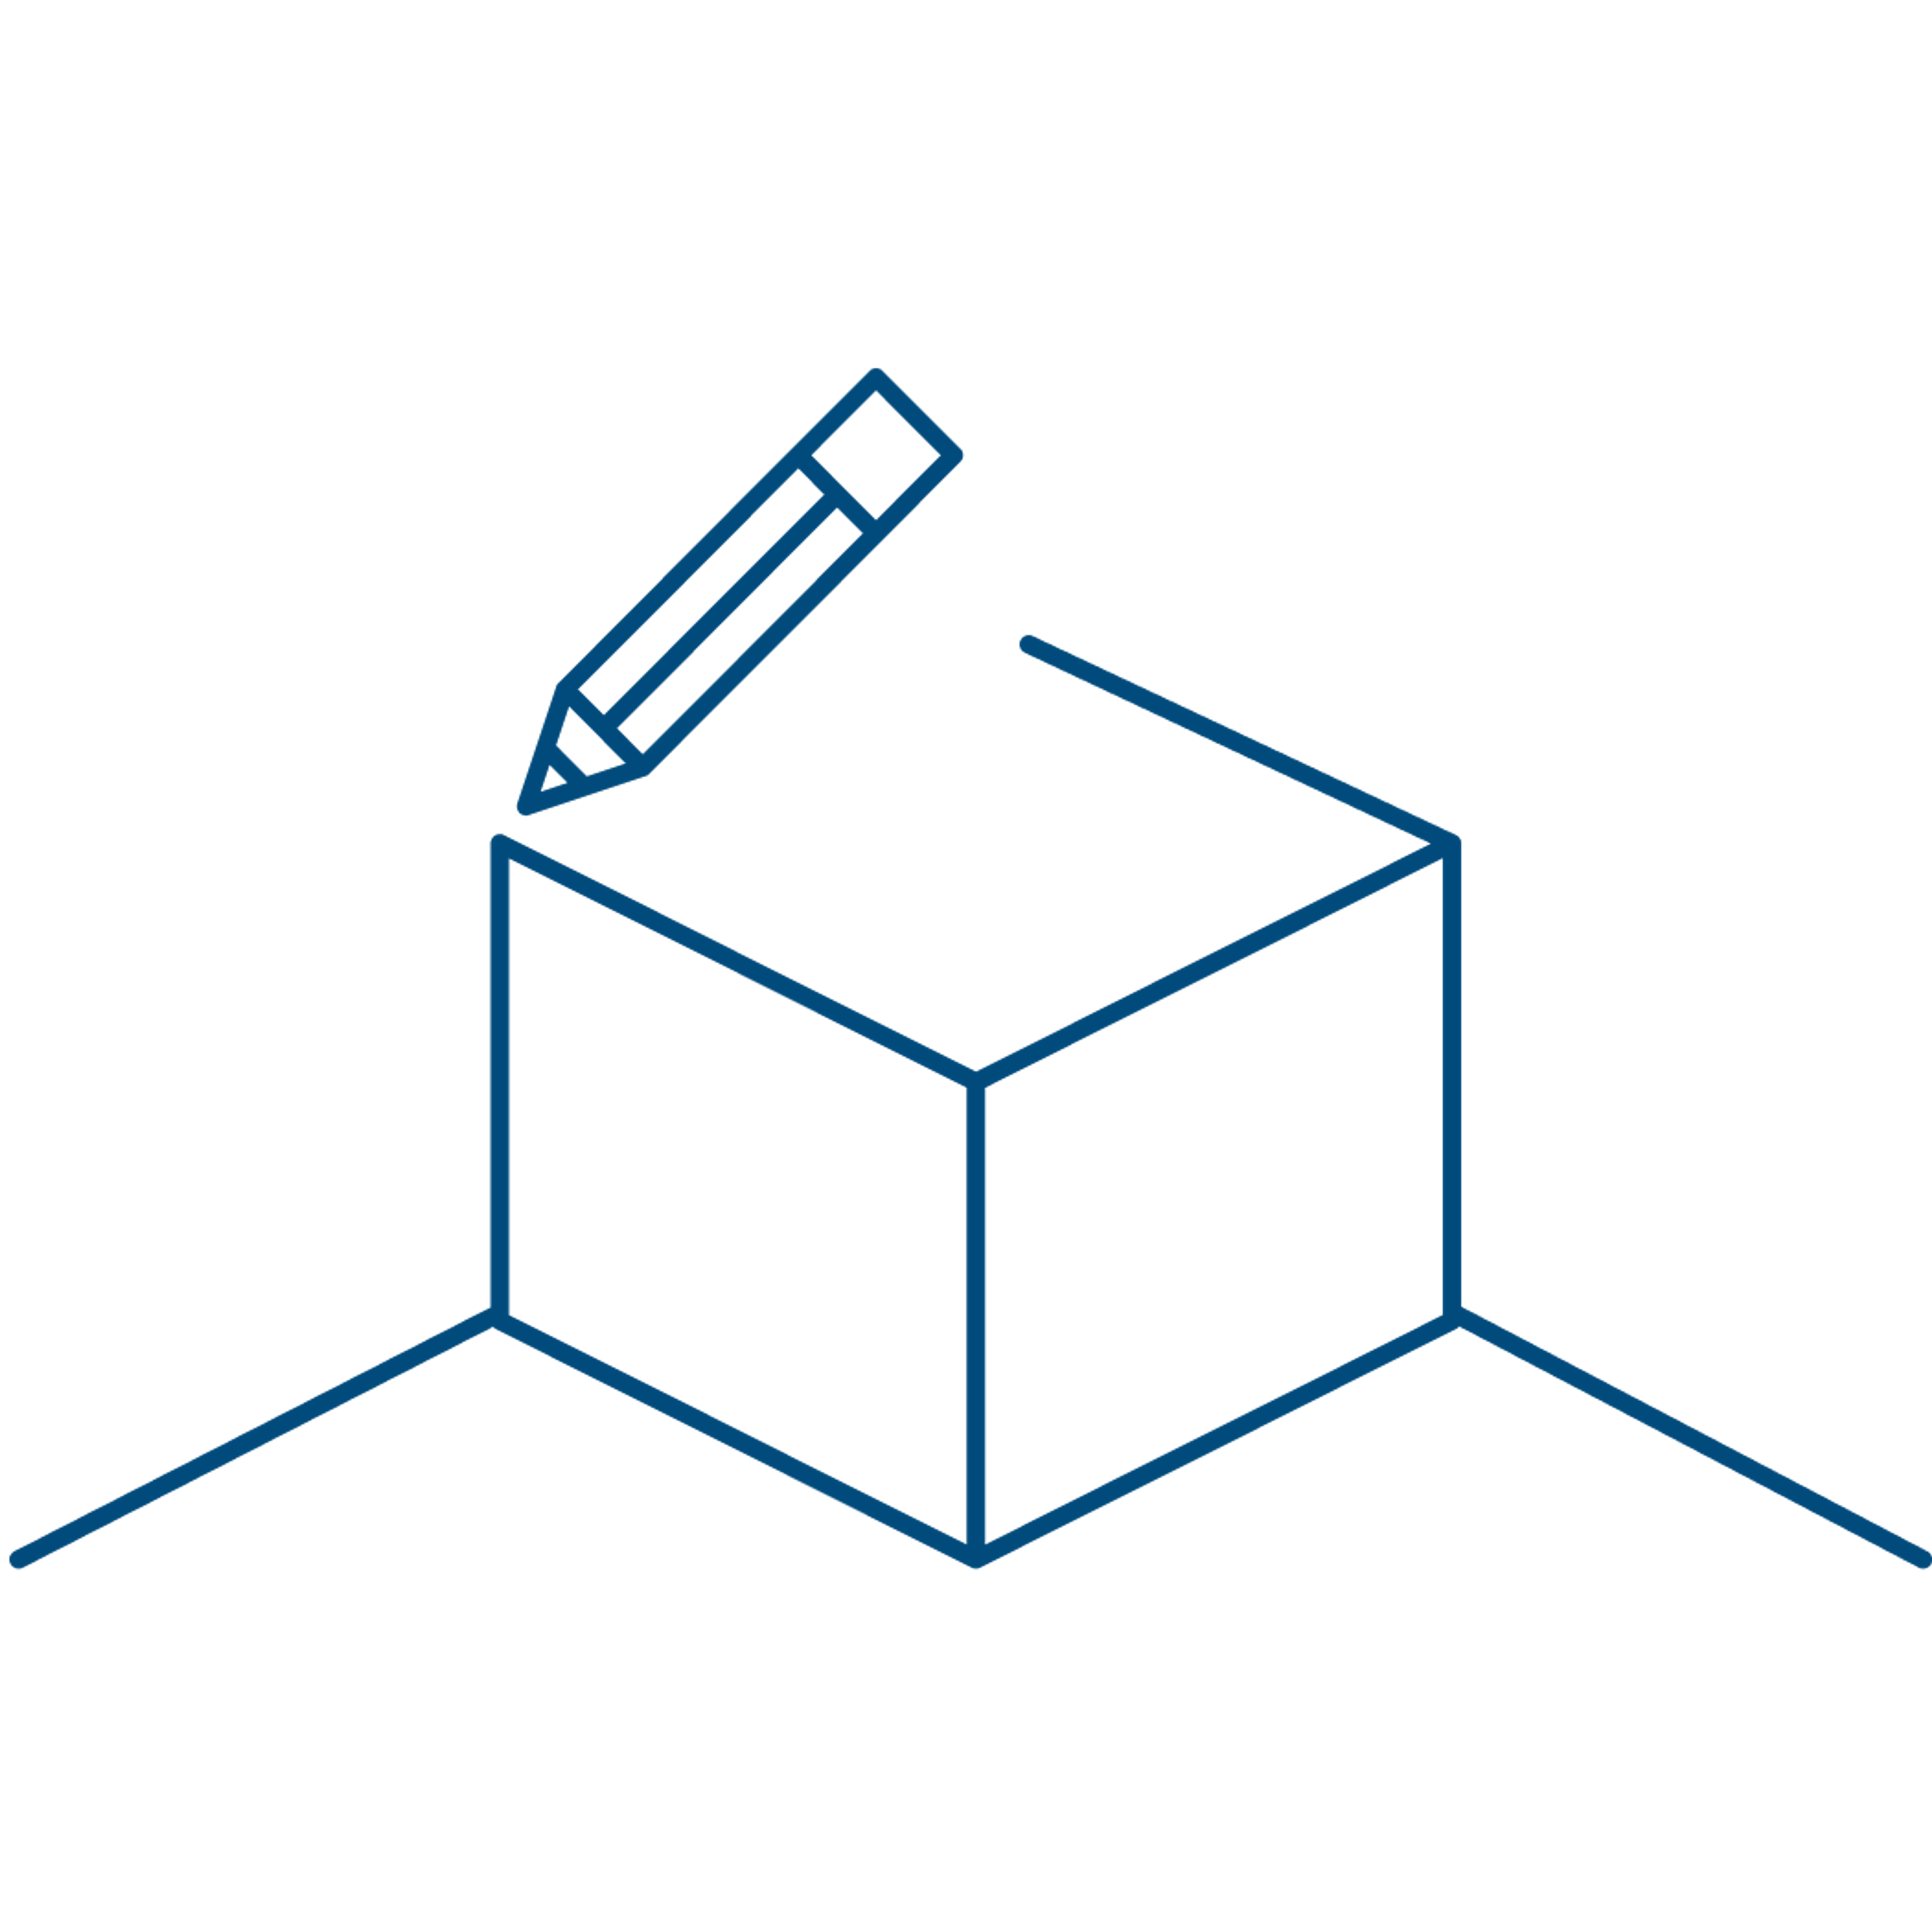 An icon depicting a pencil drawing a 3D box